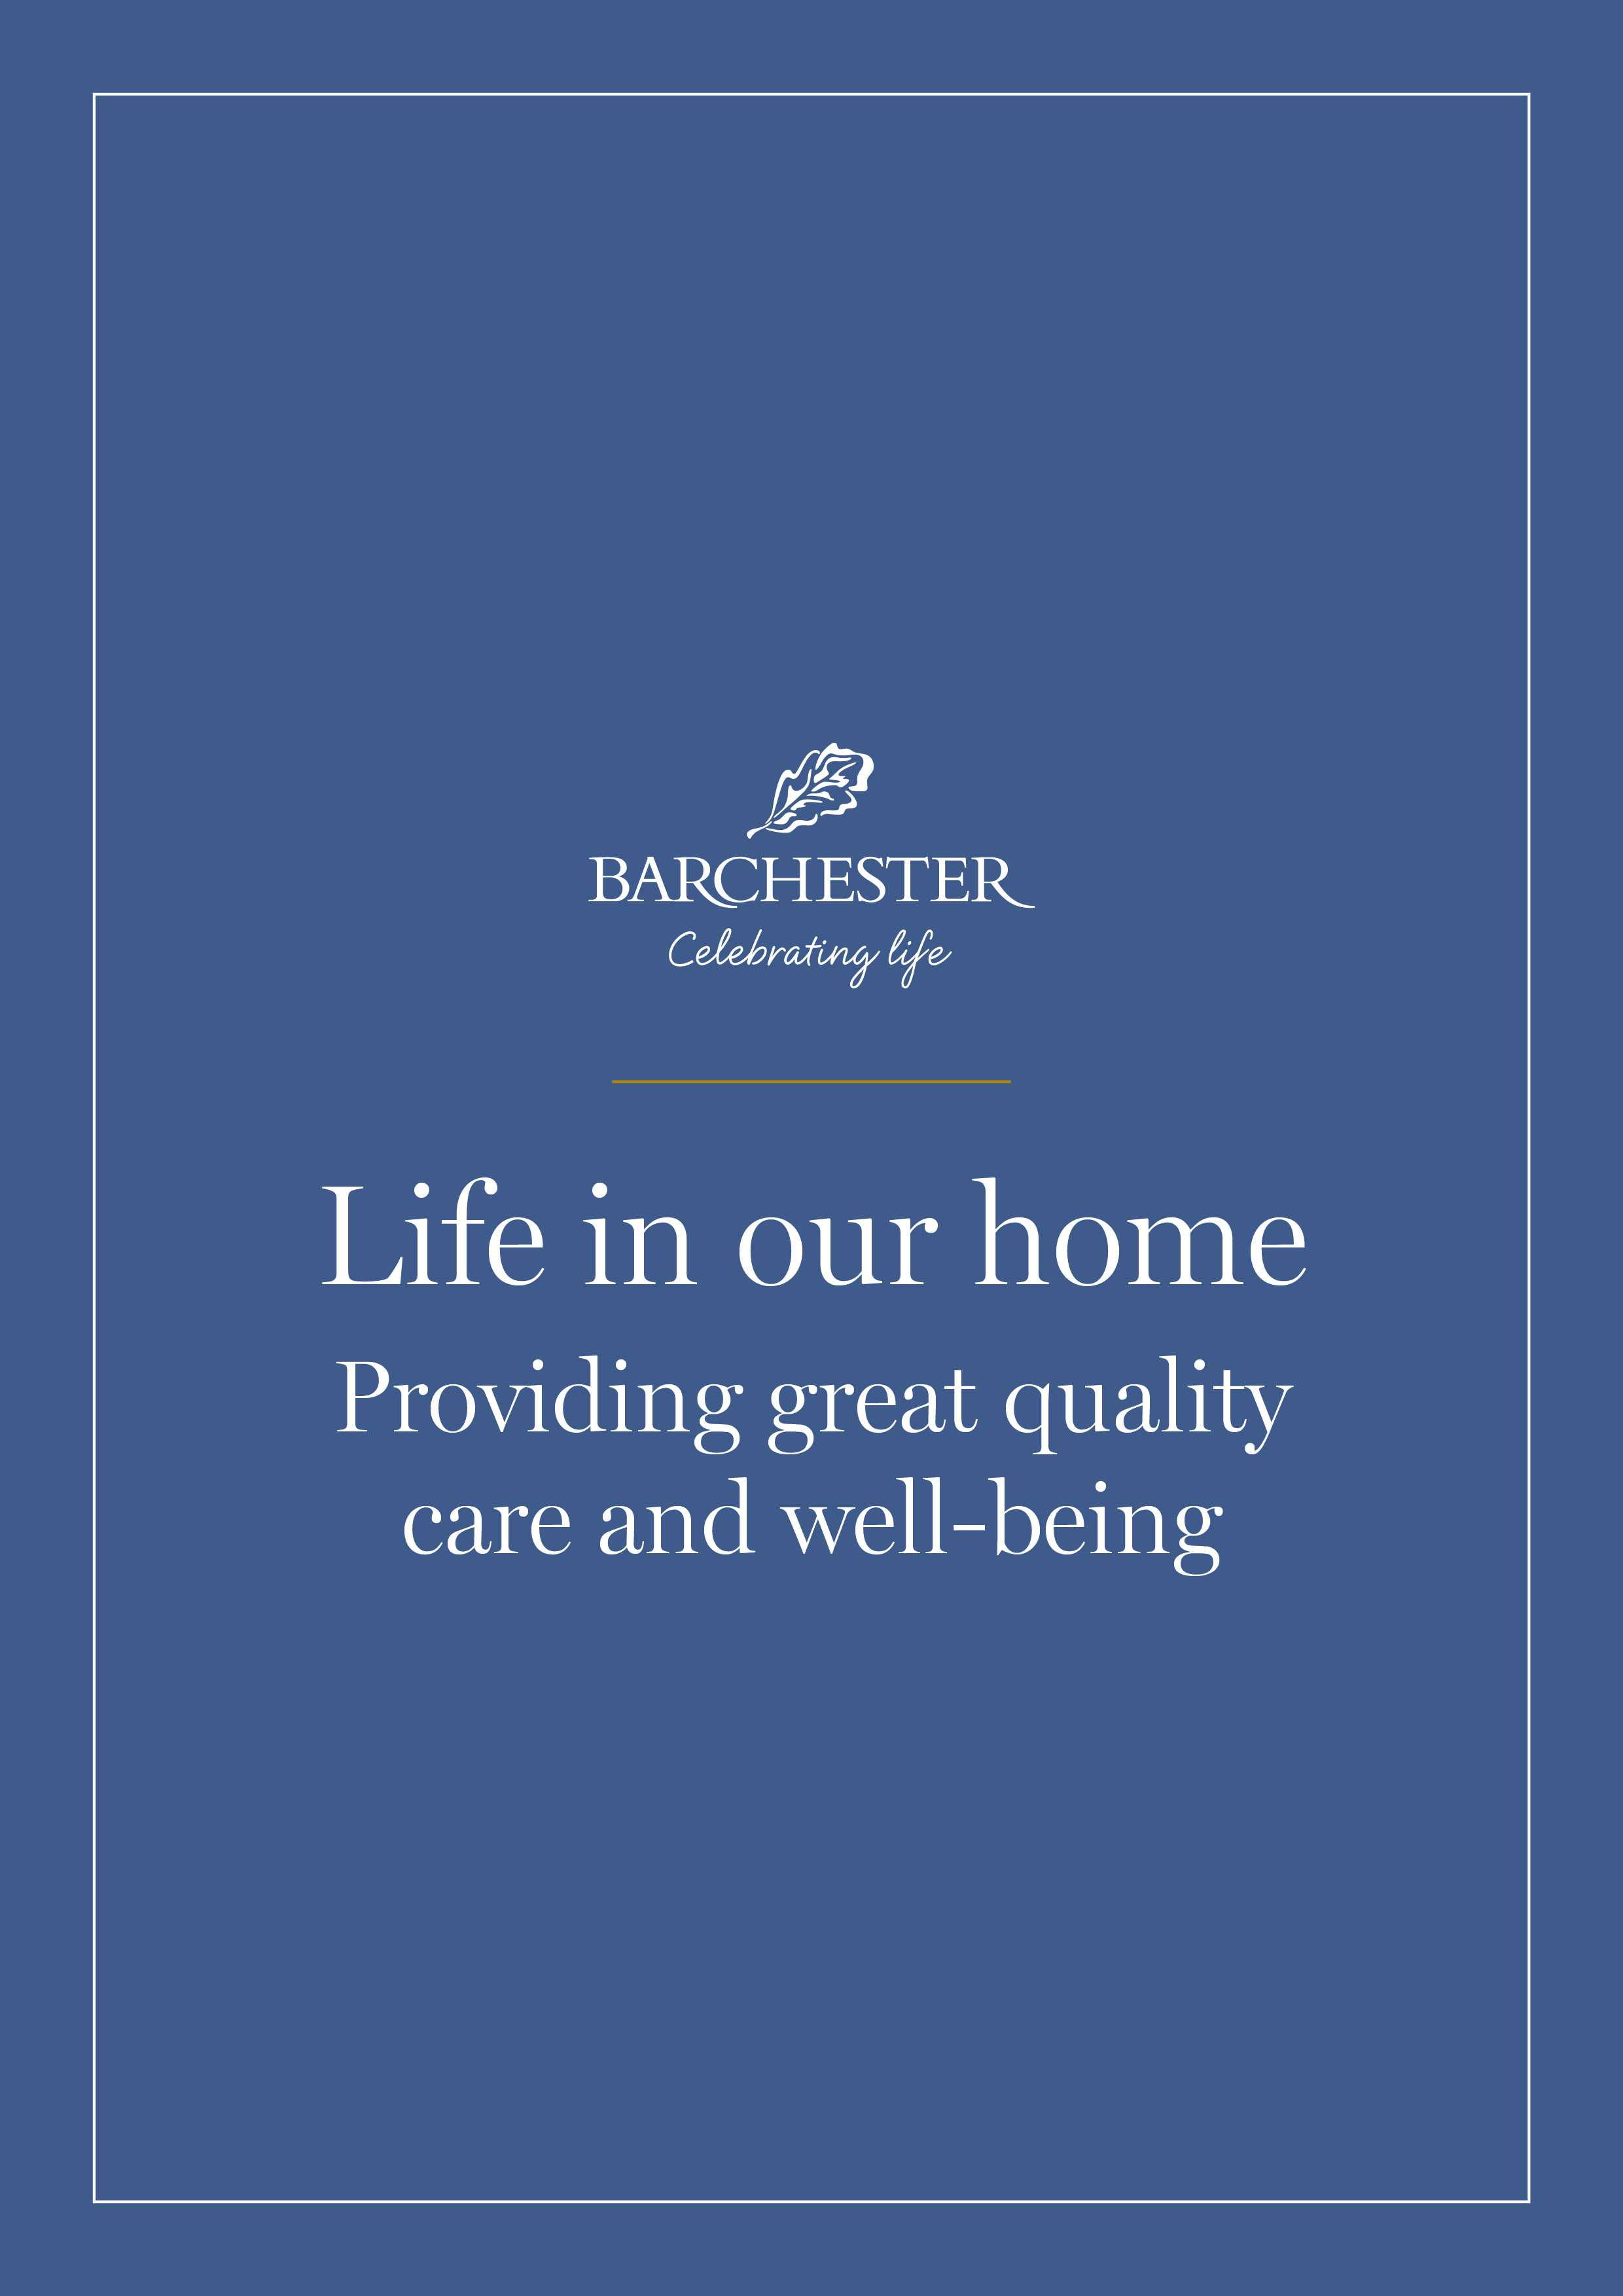 Providing great quality care and wellbeing